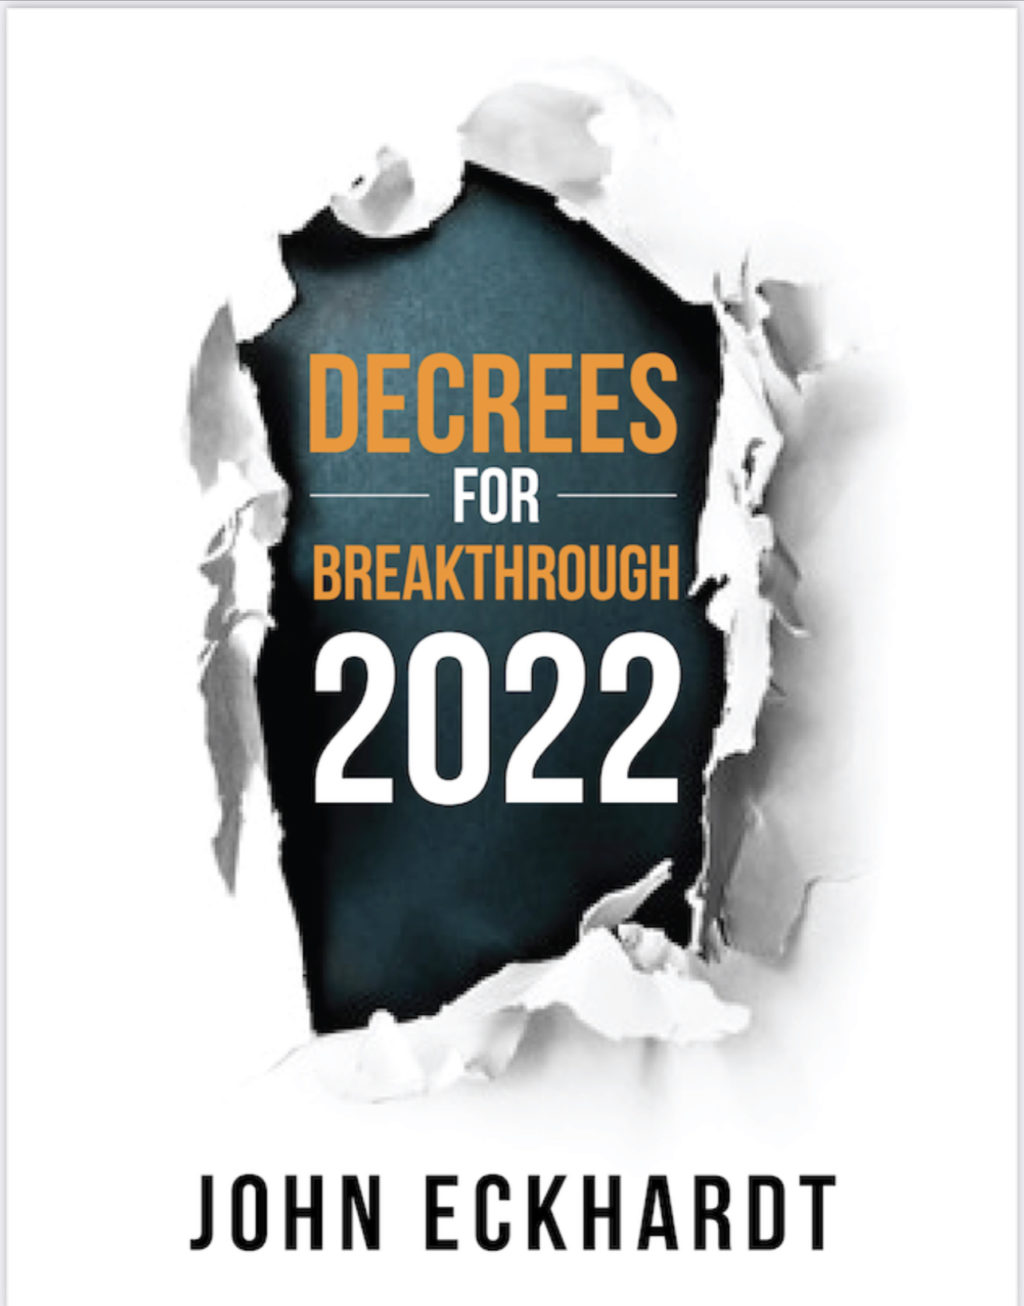 A poster with the words " decrees for breakthrough 2 0 2 2 ".